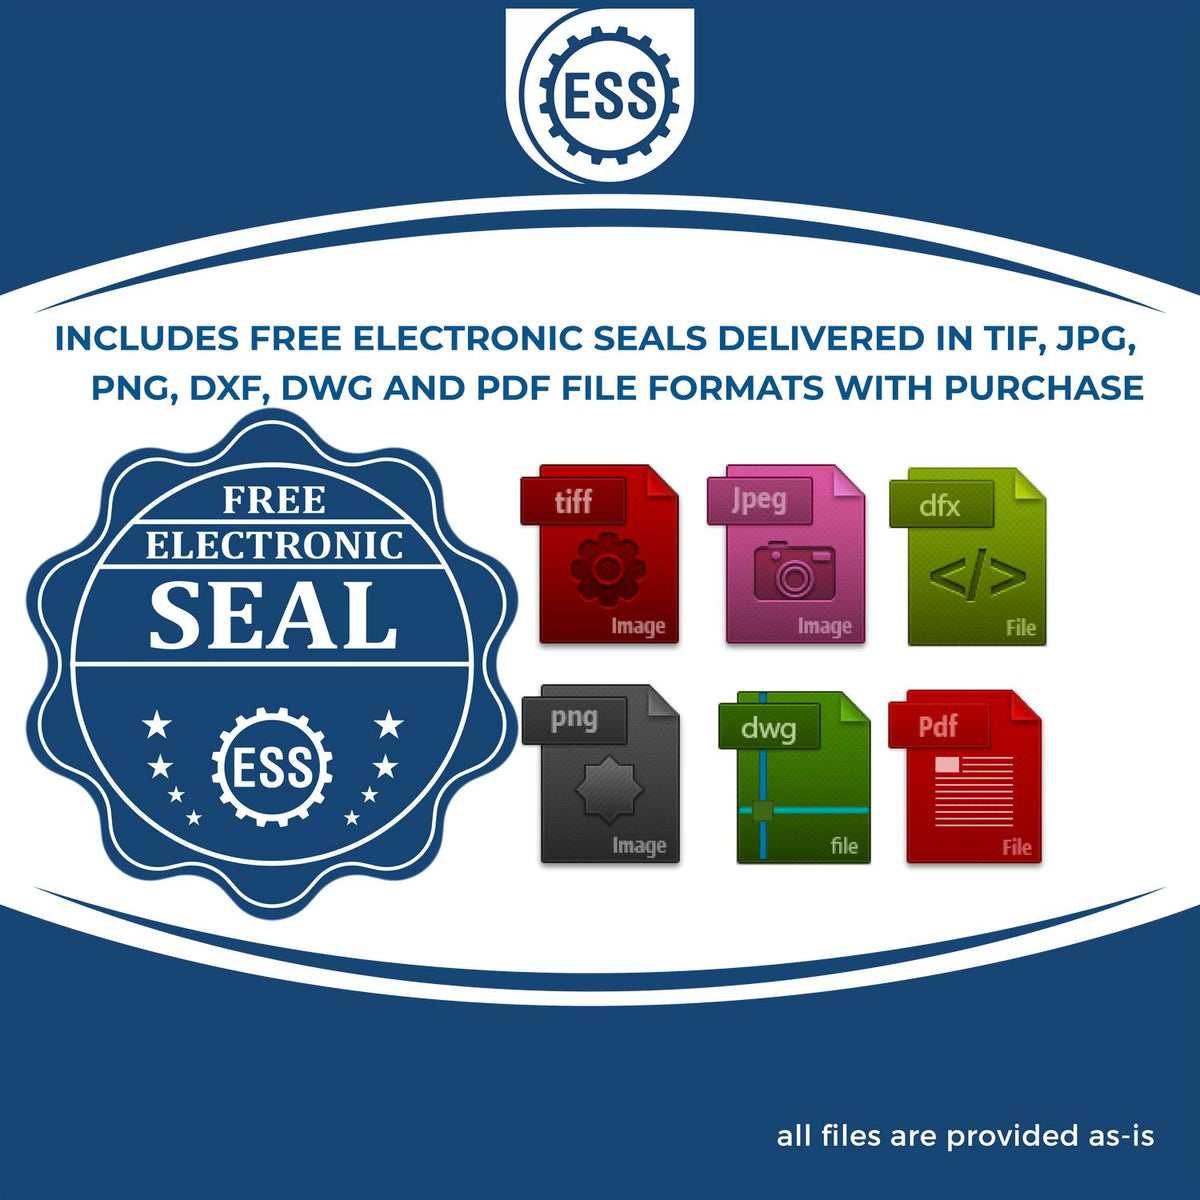 An infographic for the free electronic seal for the Slim Pre-Inked New Mexico Landscape Architect Seal Stamp illustrating the different file type icons such as DXF, DWG, TIF, JPG and PNG.